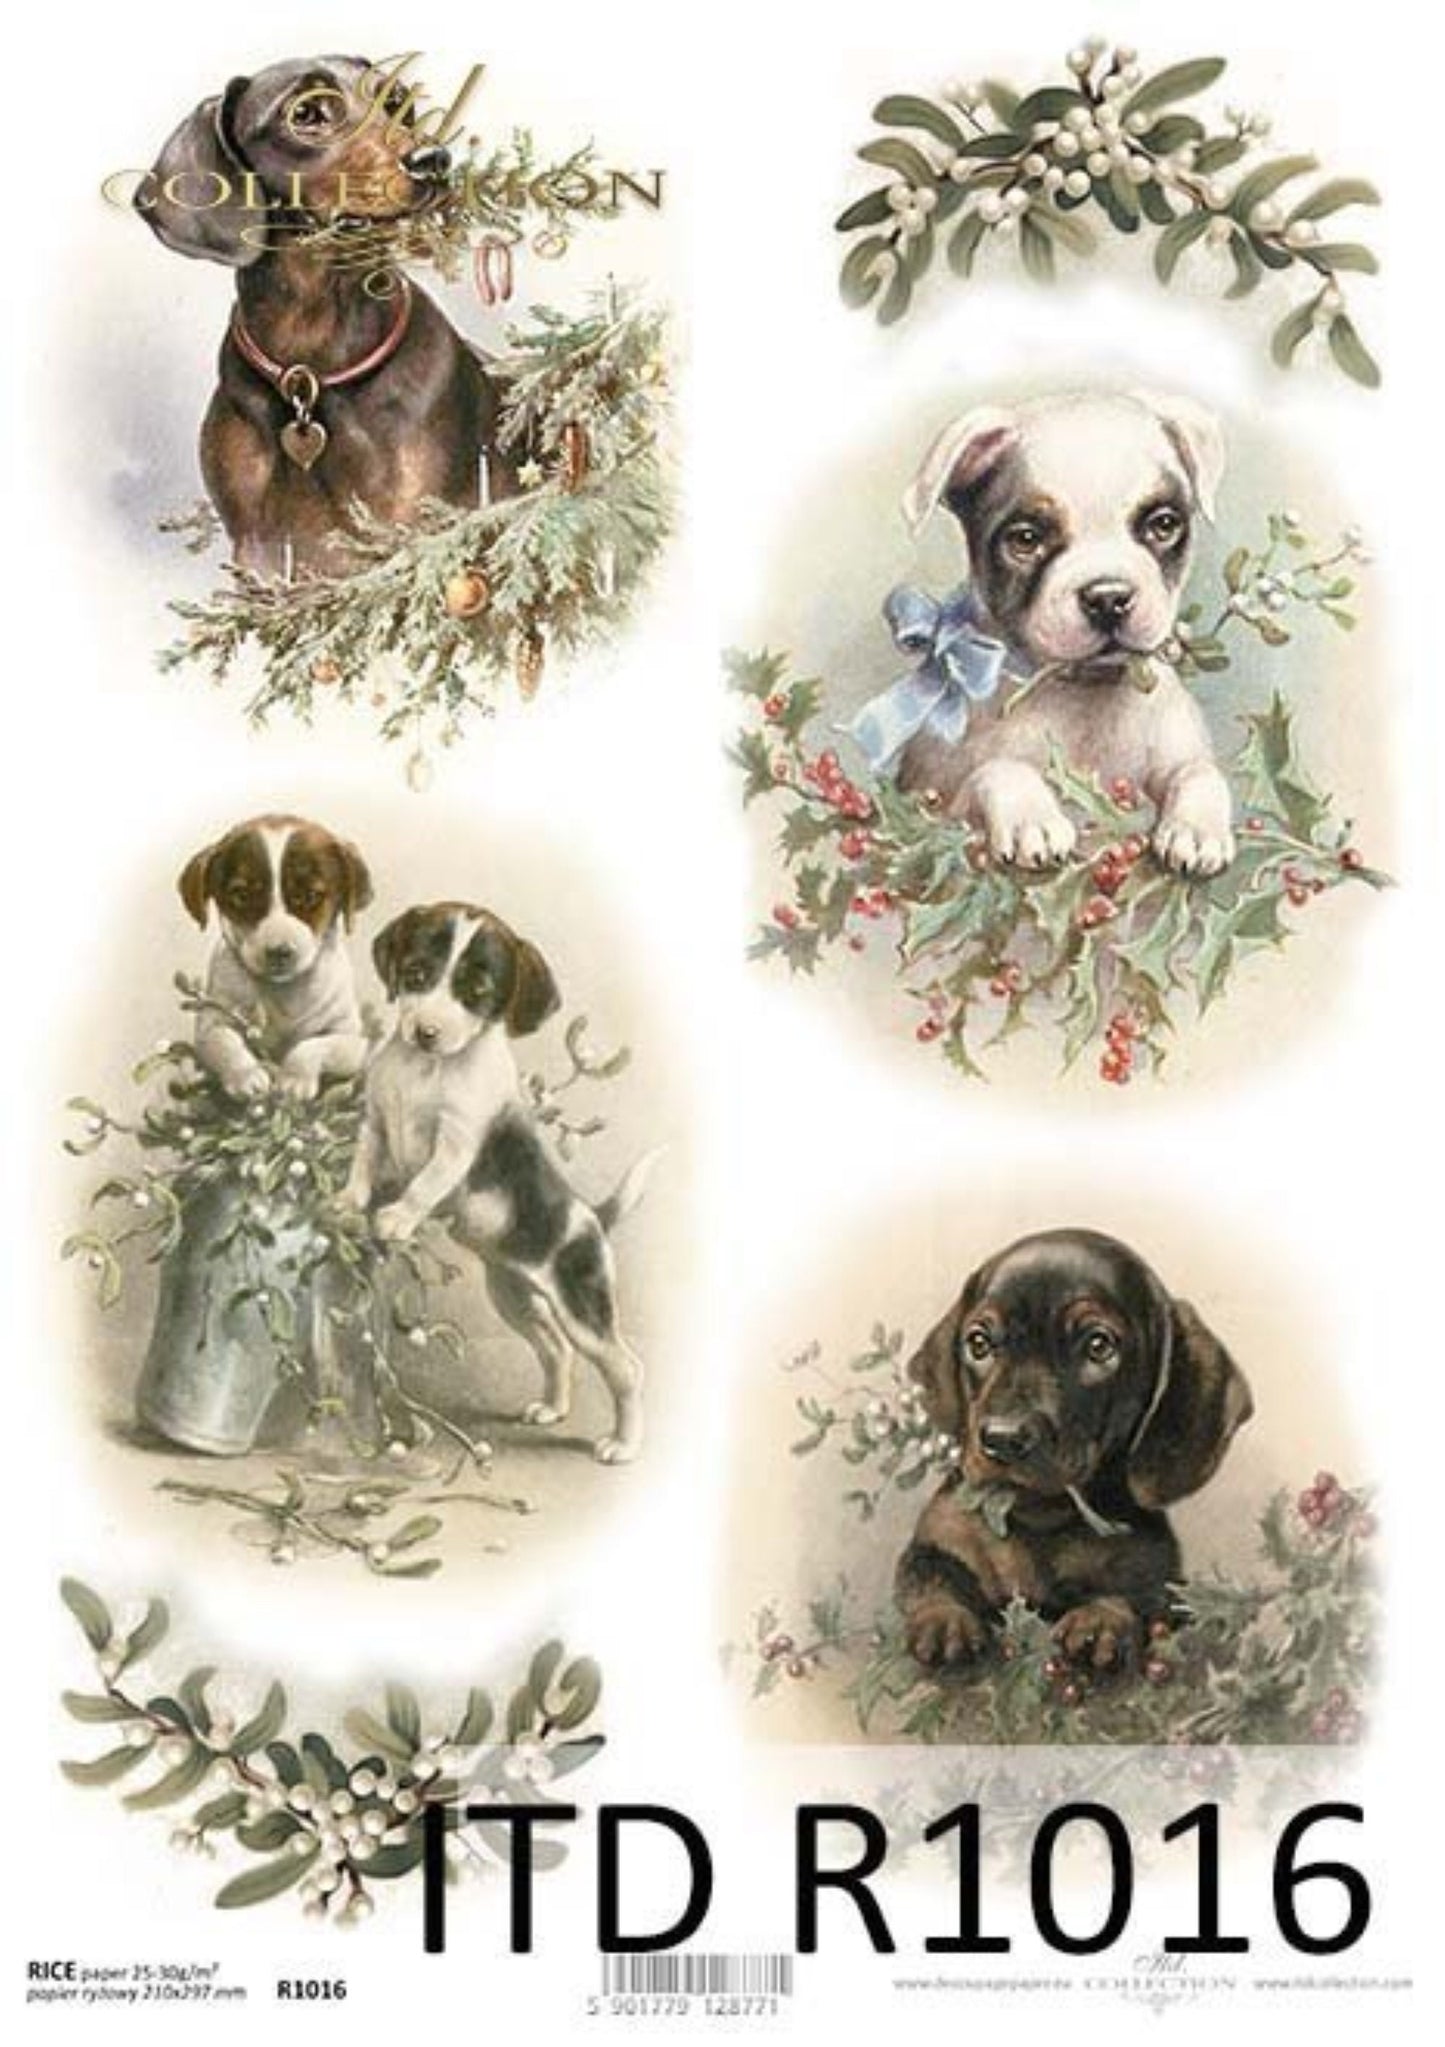 ITD Collection Rice Paper for Decoupage R1016, Size A4 - 210x297 mm, 8.27x11.7 inch, Vintage, Christmas Puppies, Rounds, Dogs